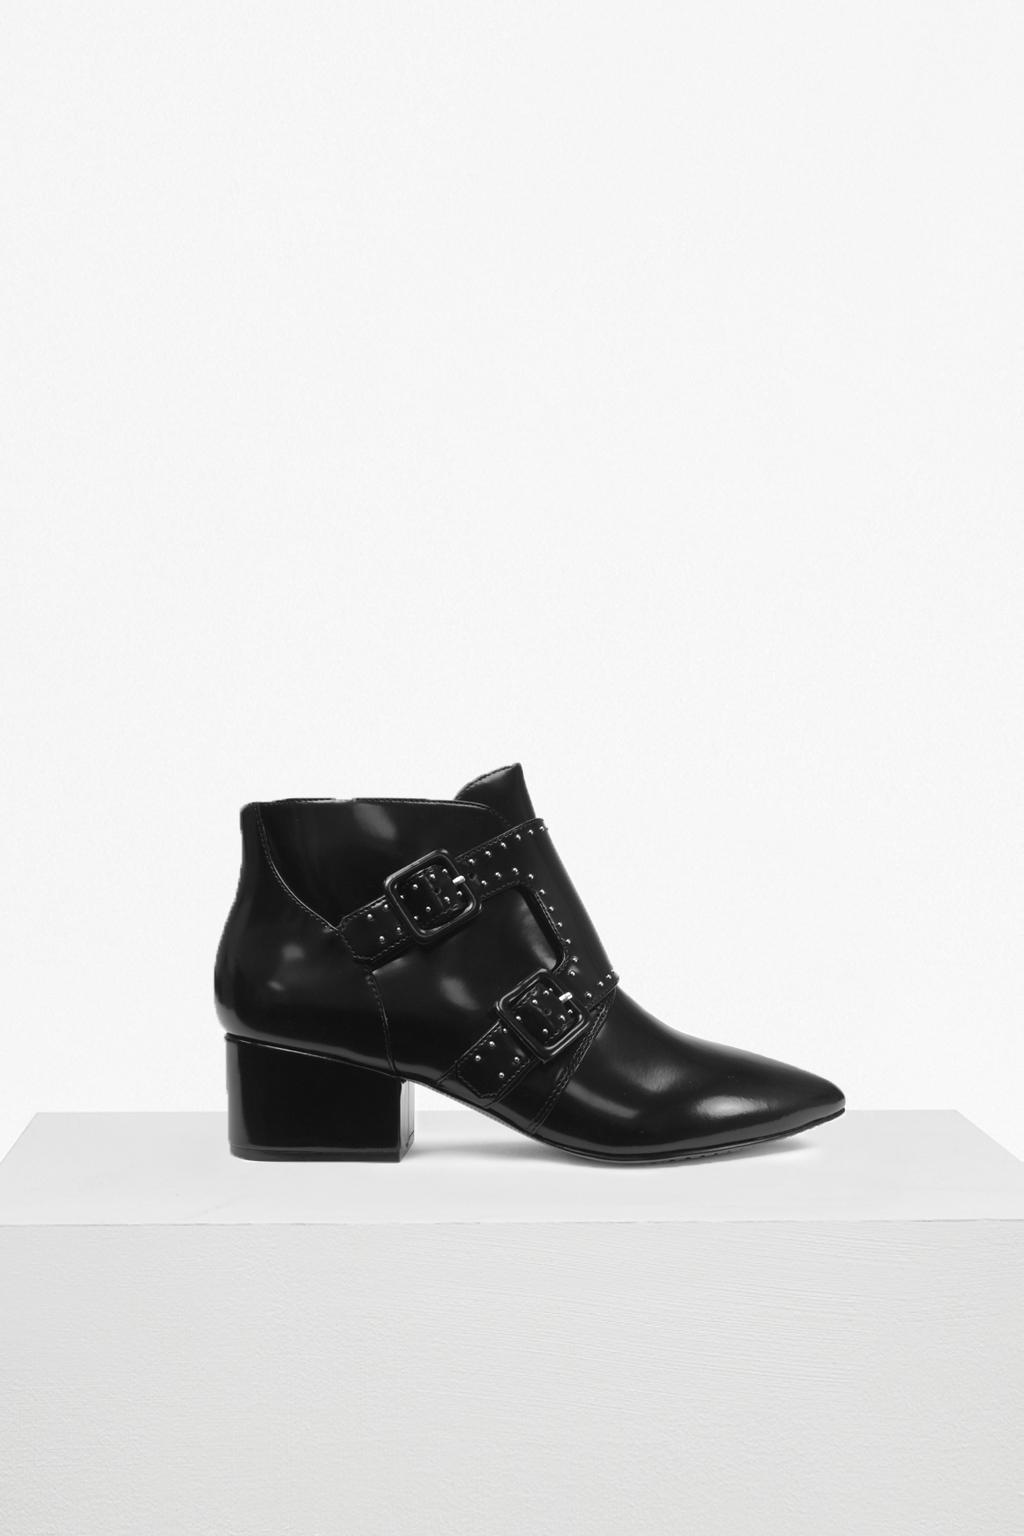 Lyst - French Connection Roree Double Buckle Stud Leather Boots in Black